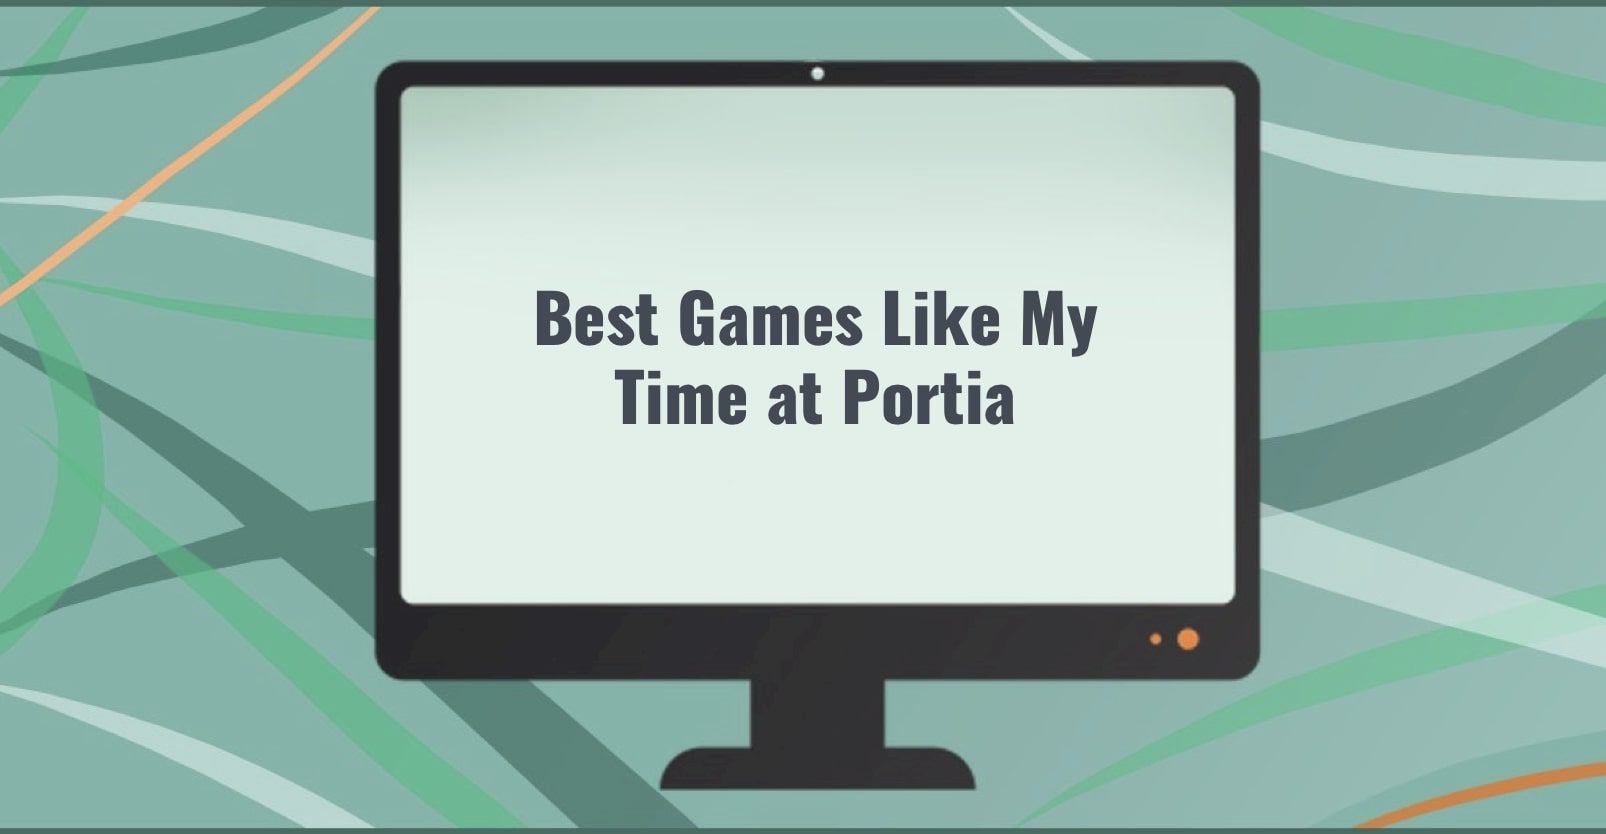 Best Games Like My Time at Portia